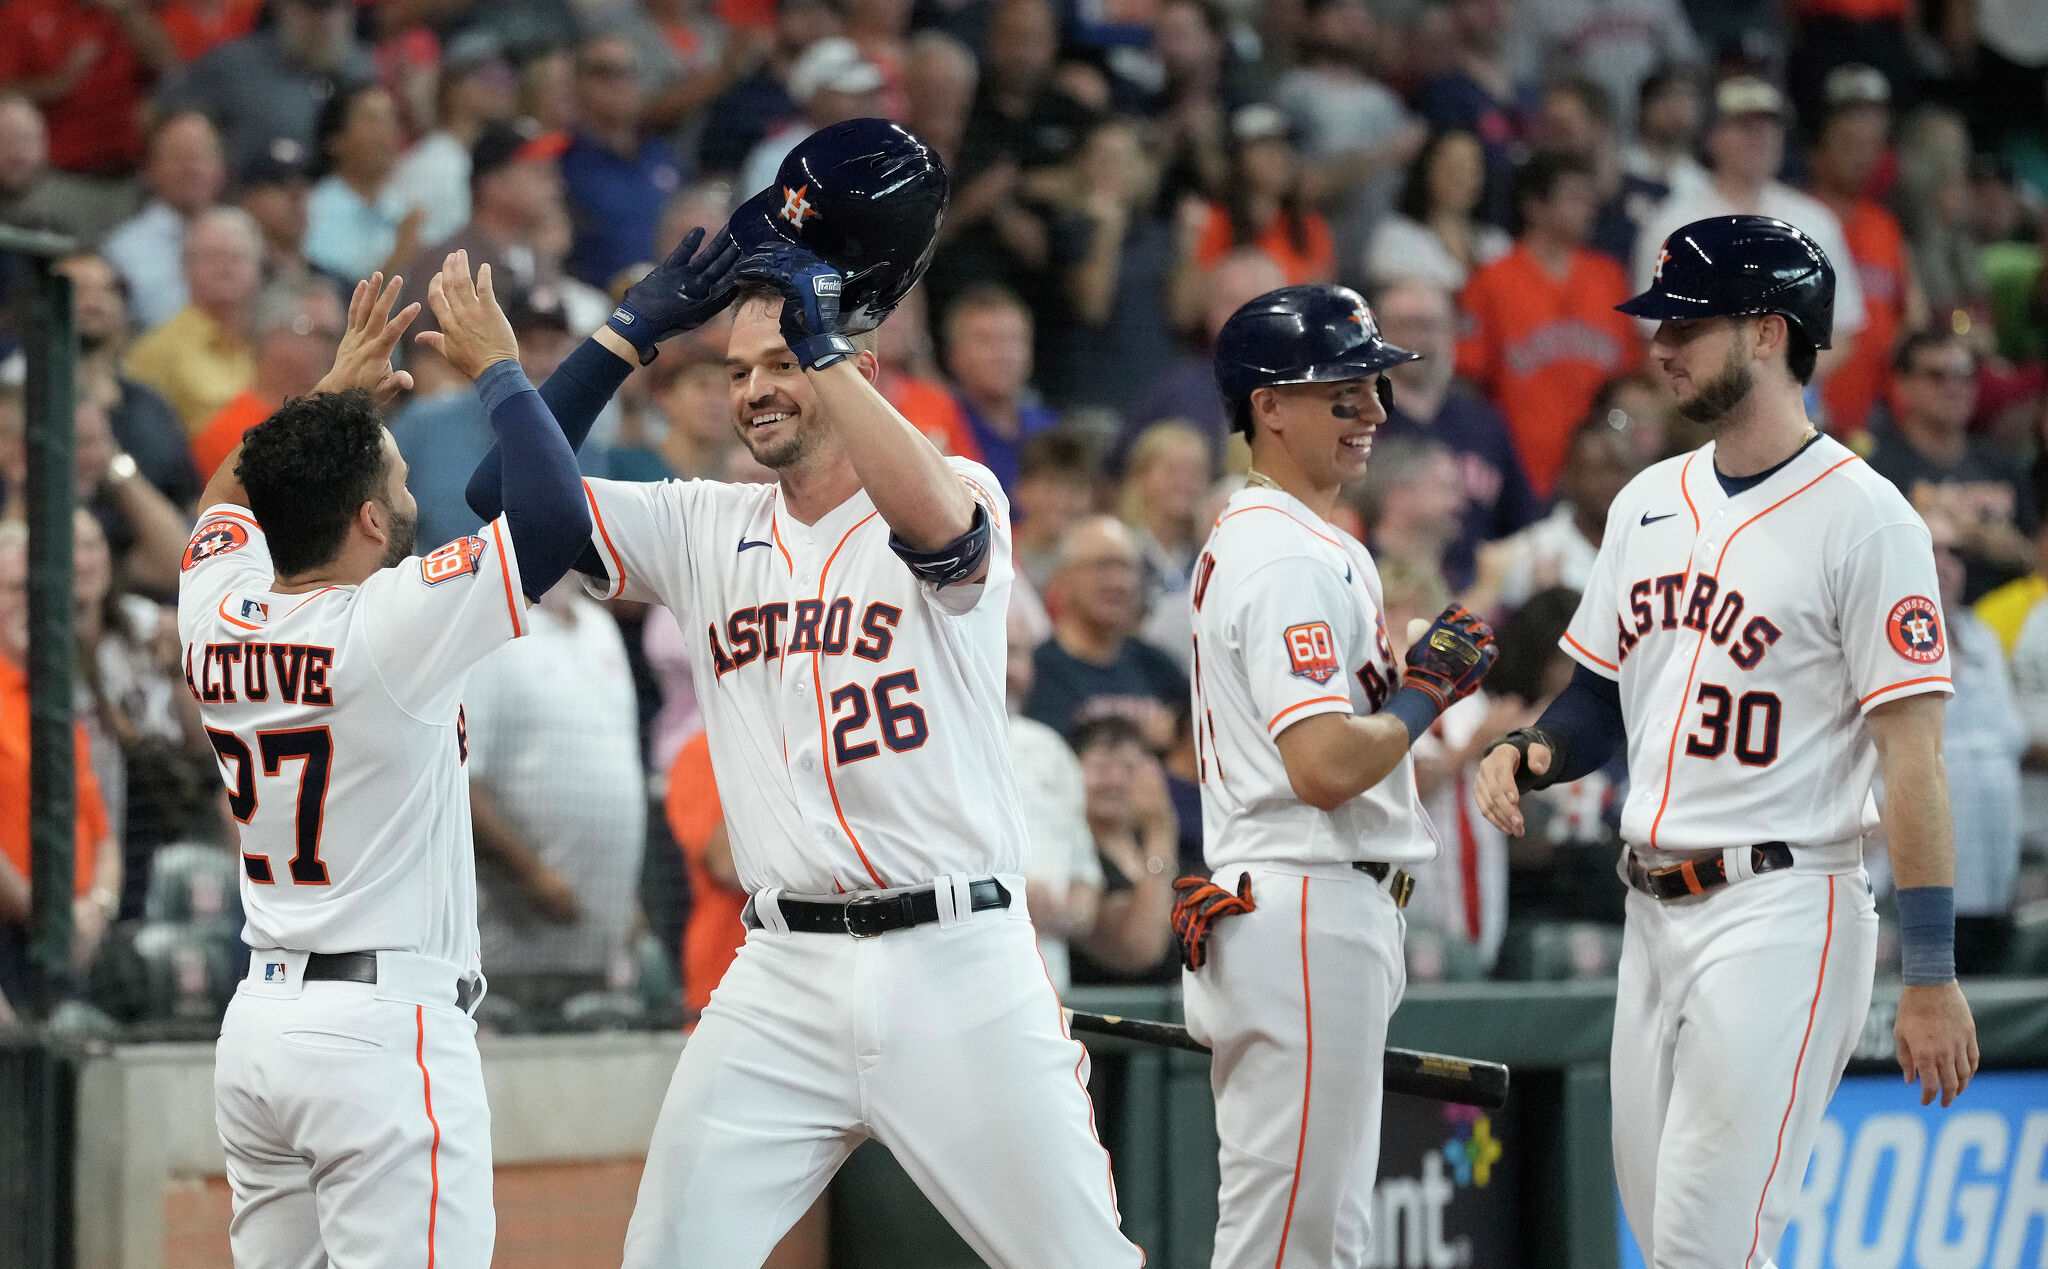 Houston Astros: José Urquidy shows his value in win over Red Sox